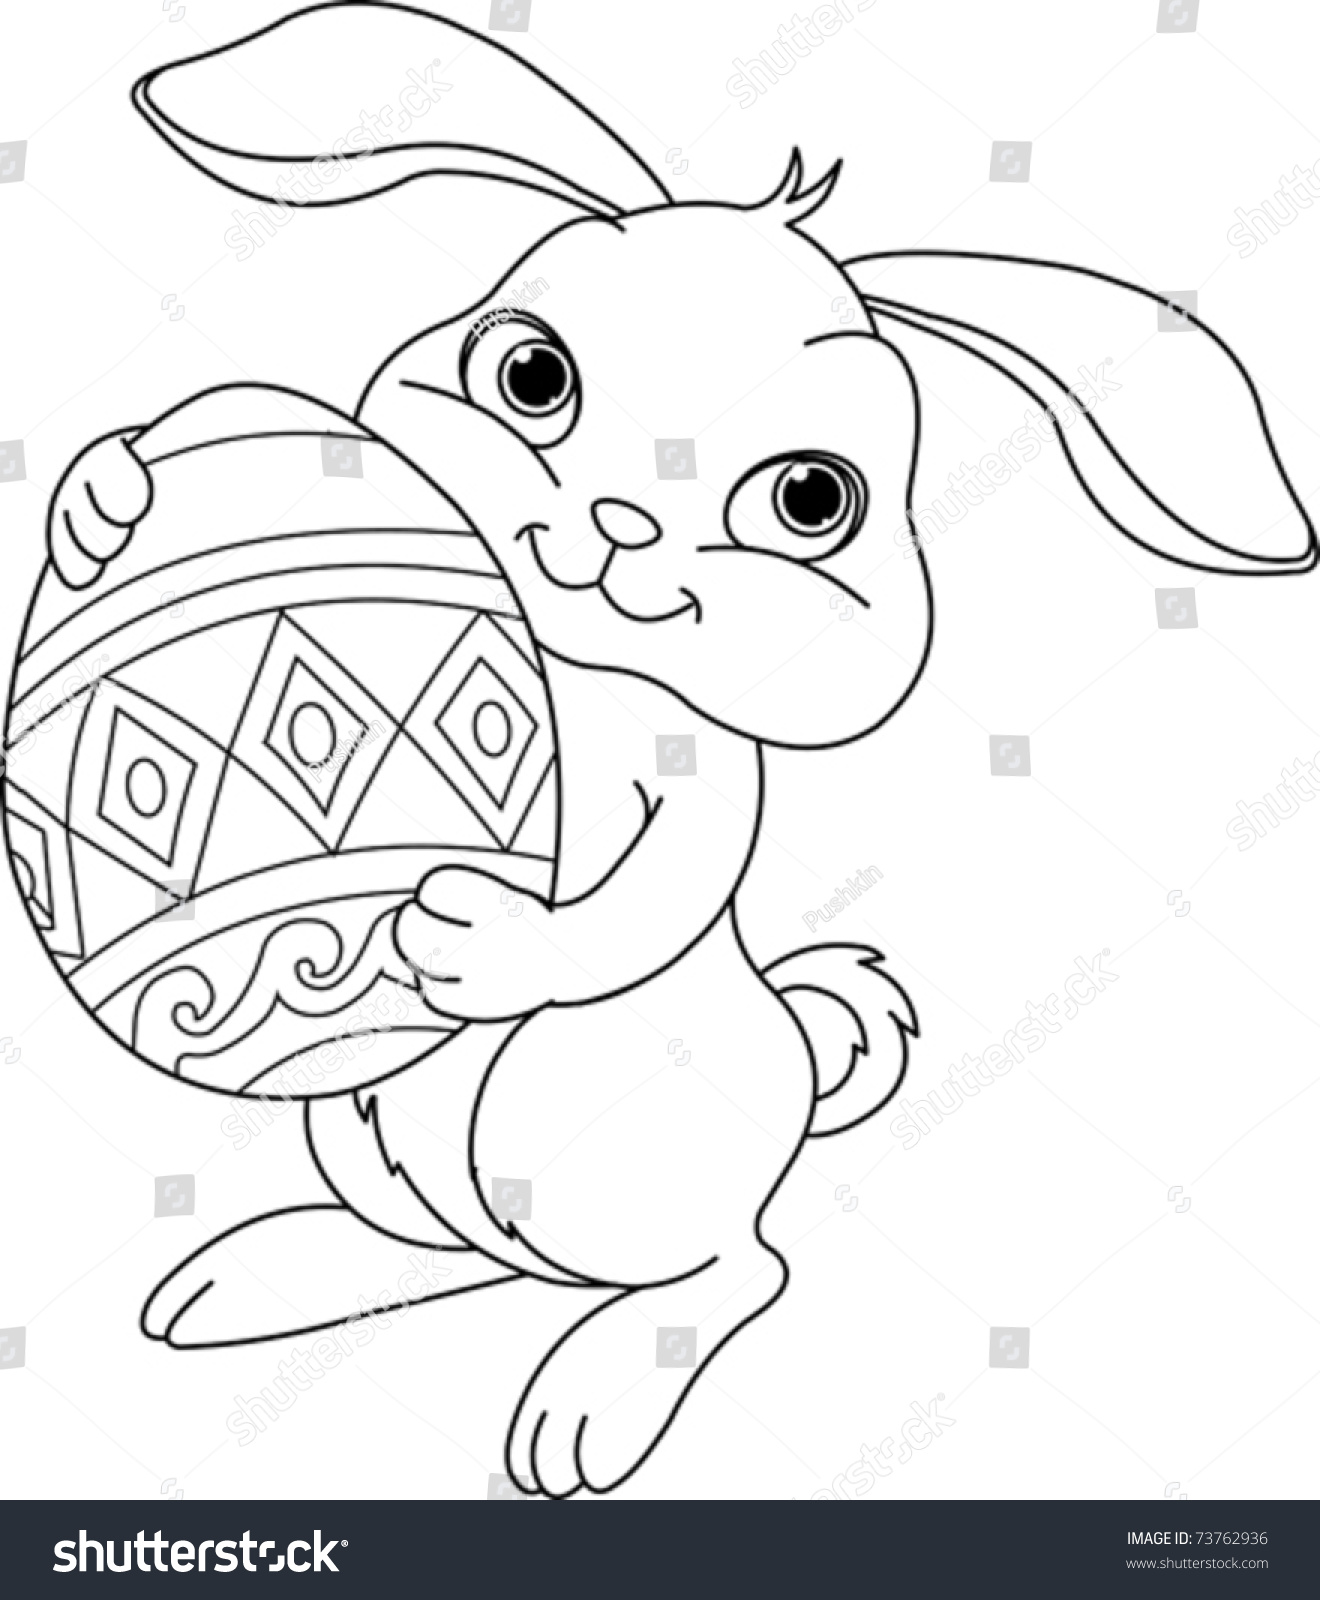 Illustration of happy Easter bunny carrying egg Coloring page